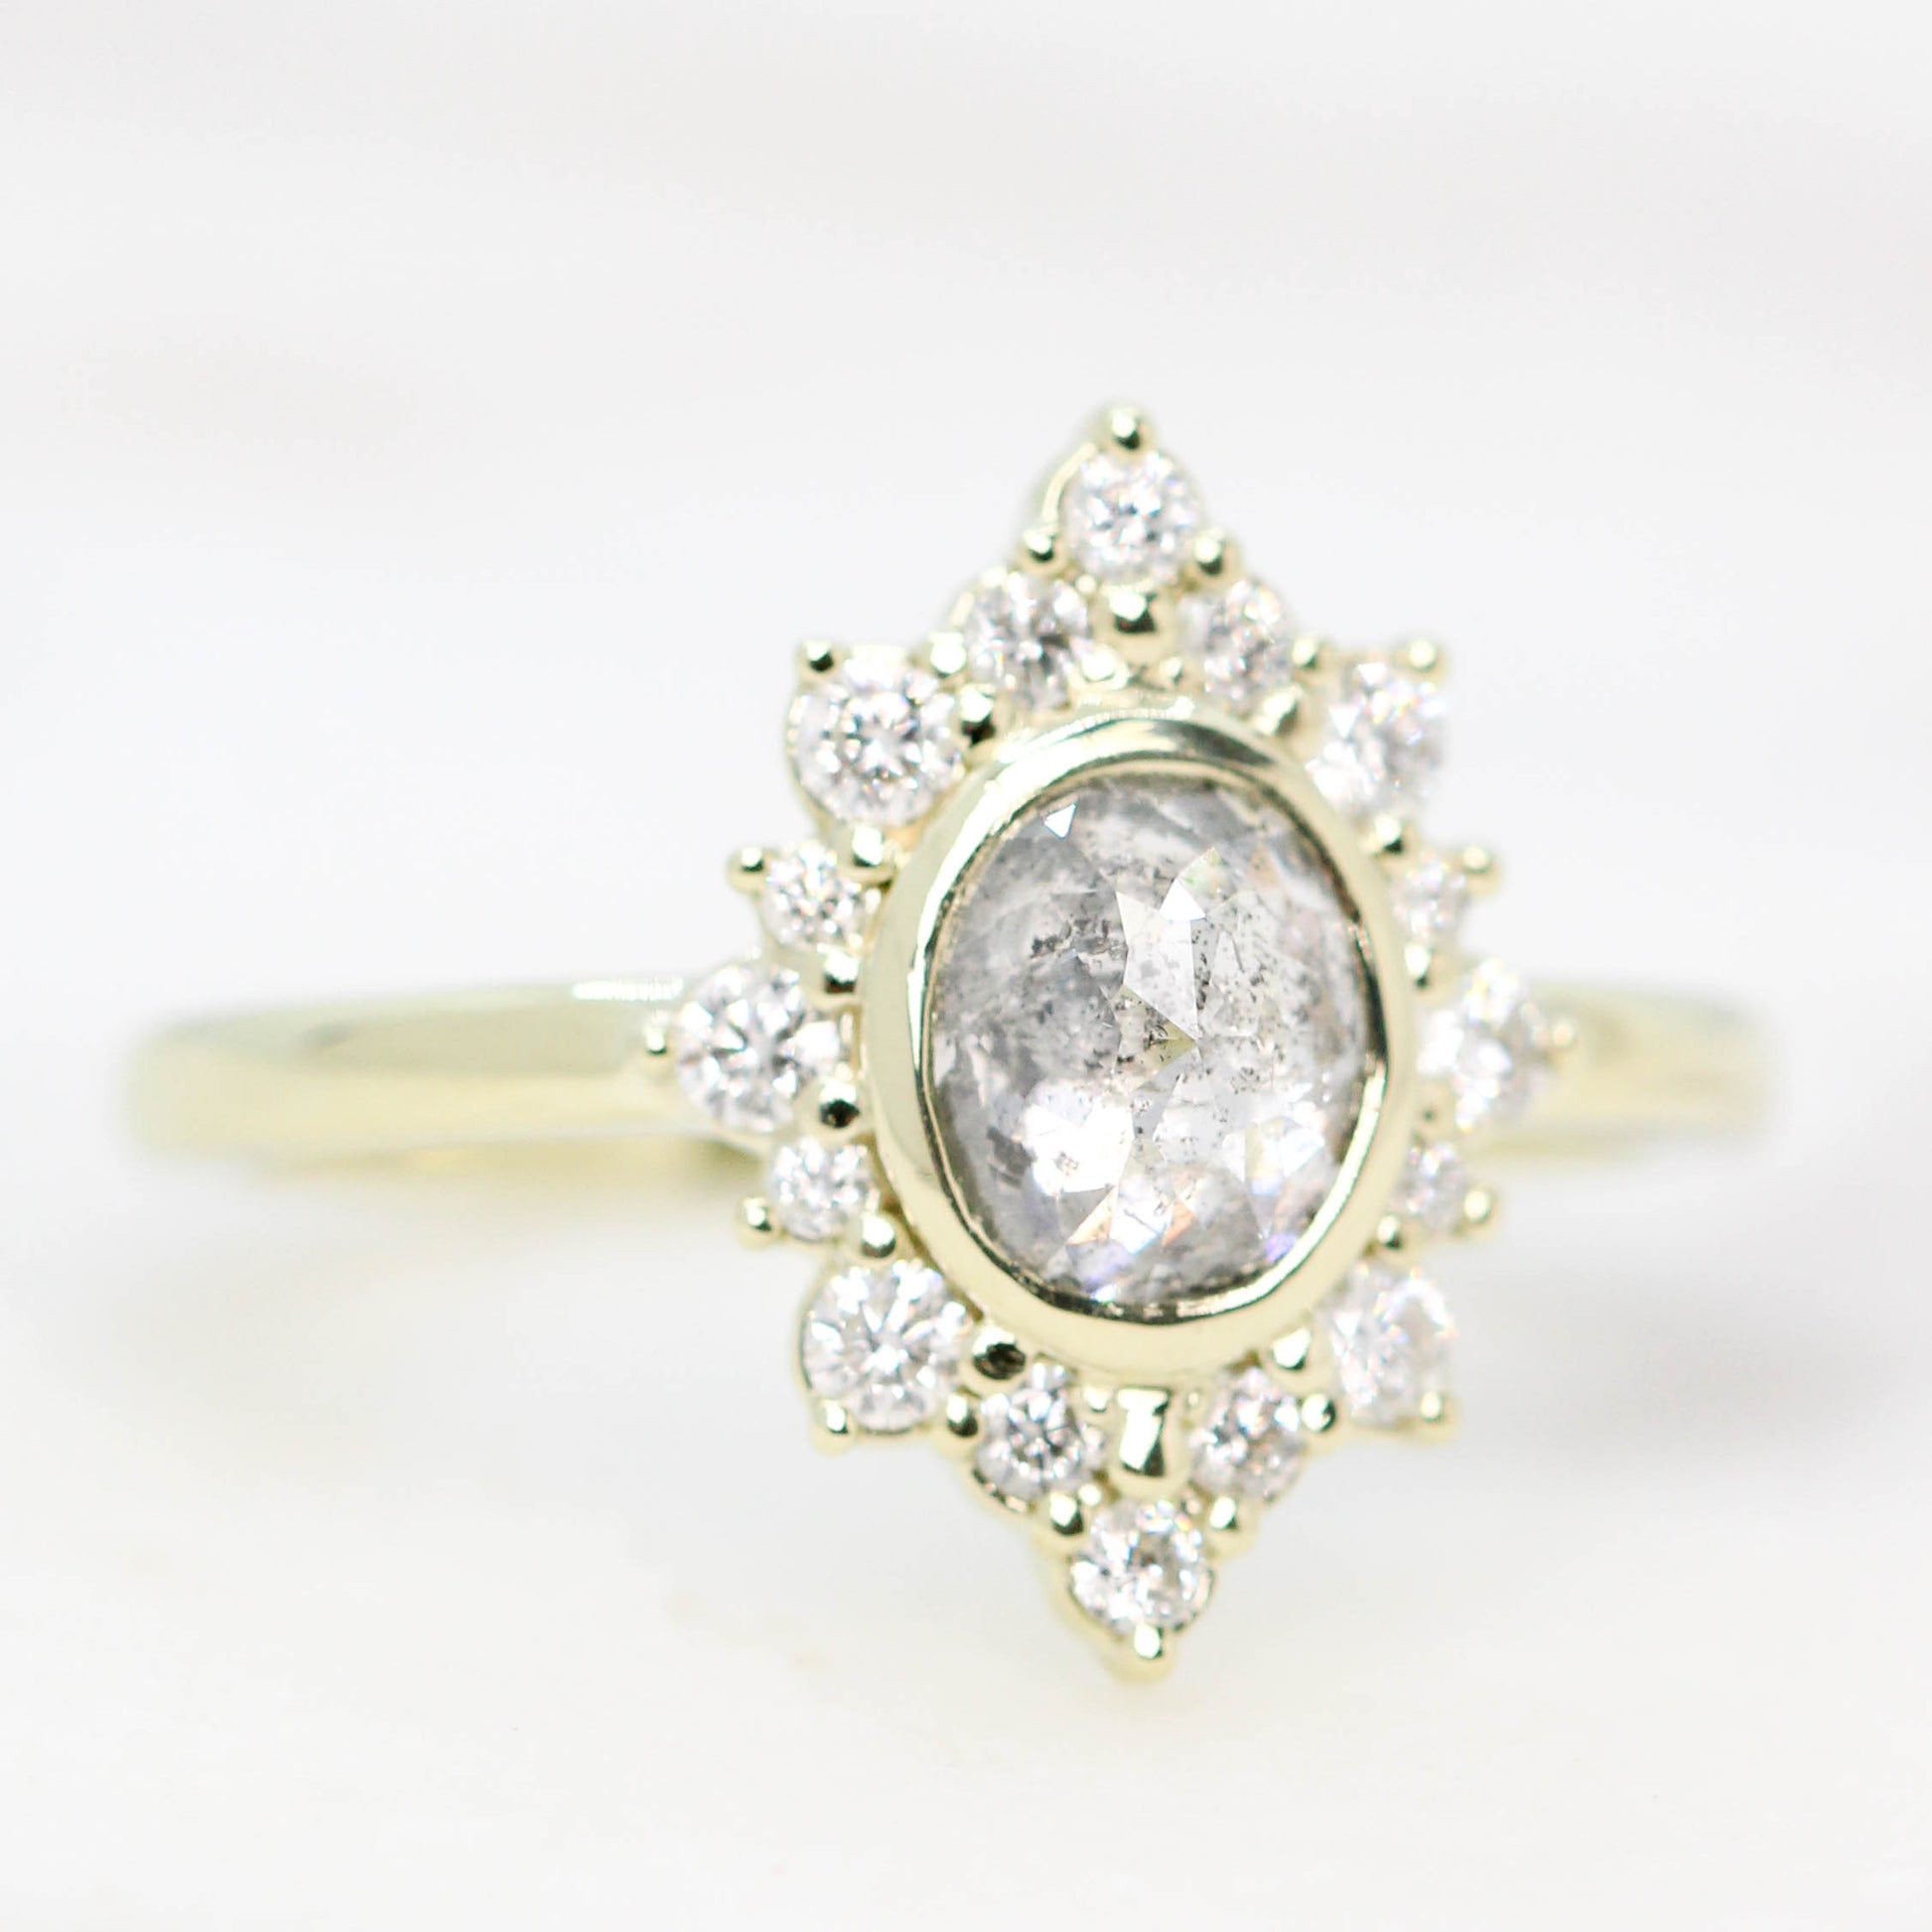 Estrella Ring with a 1.06 Carat Gray Celestial Oval Diamond and White Accent Diamonds in 14k Green Gold - Ready to Size and Ship - Midwinter Co. Alternative Bridal Rings and Modern Fine Jewelry